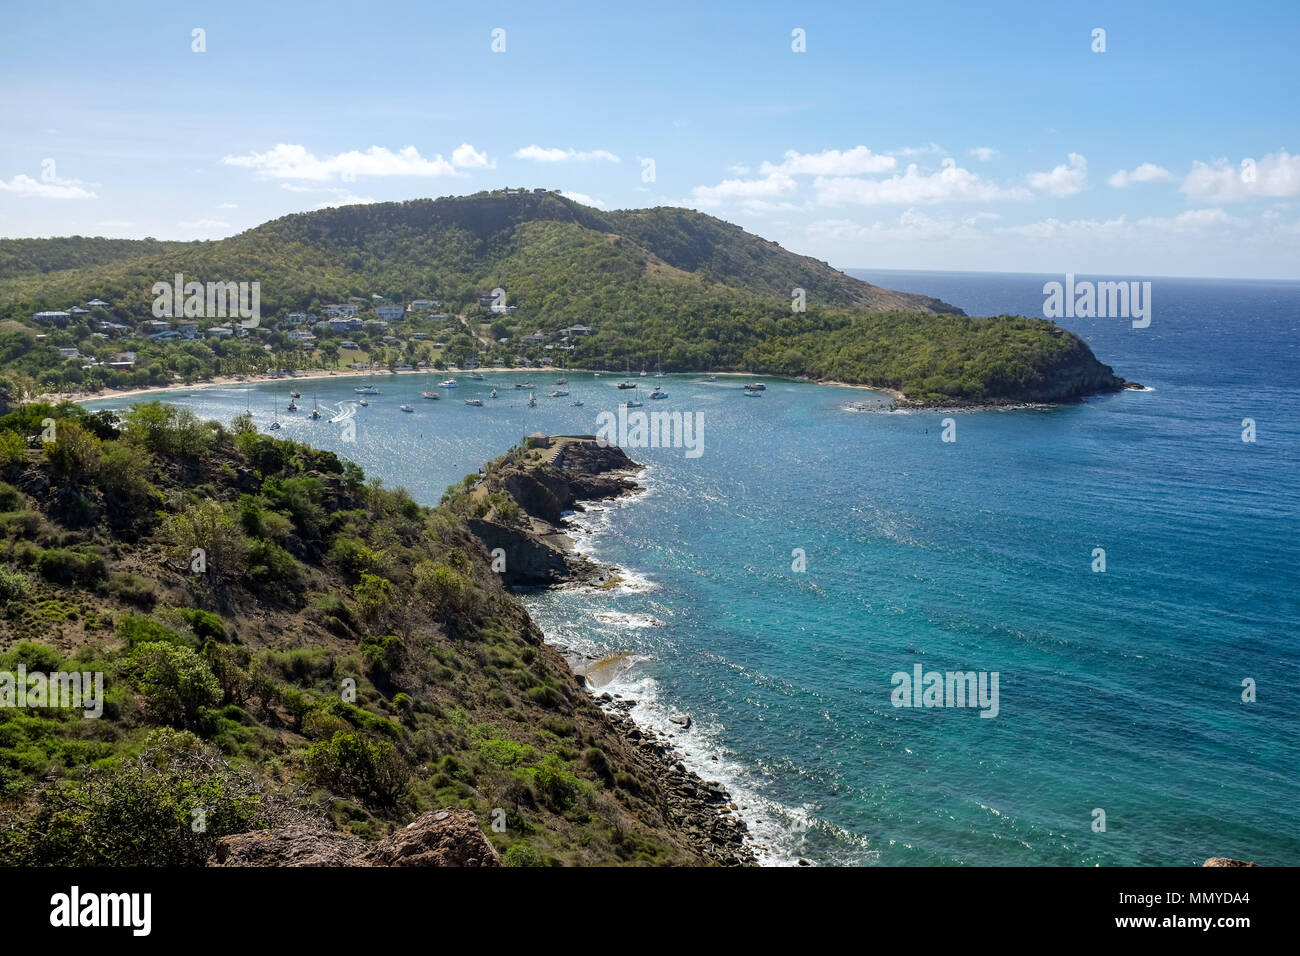 Antigua Lesser Antilles islands in the Caribbean West Indies - Entrance to English Harbour Stock Photo